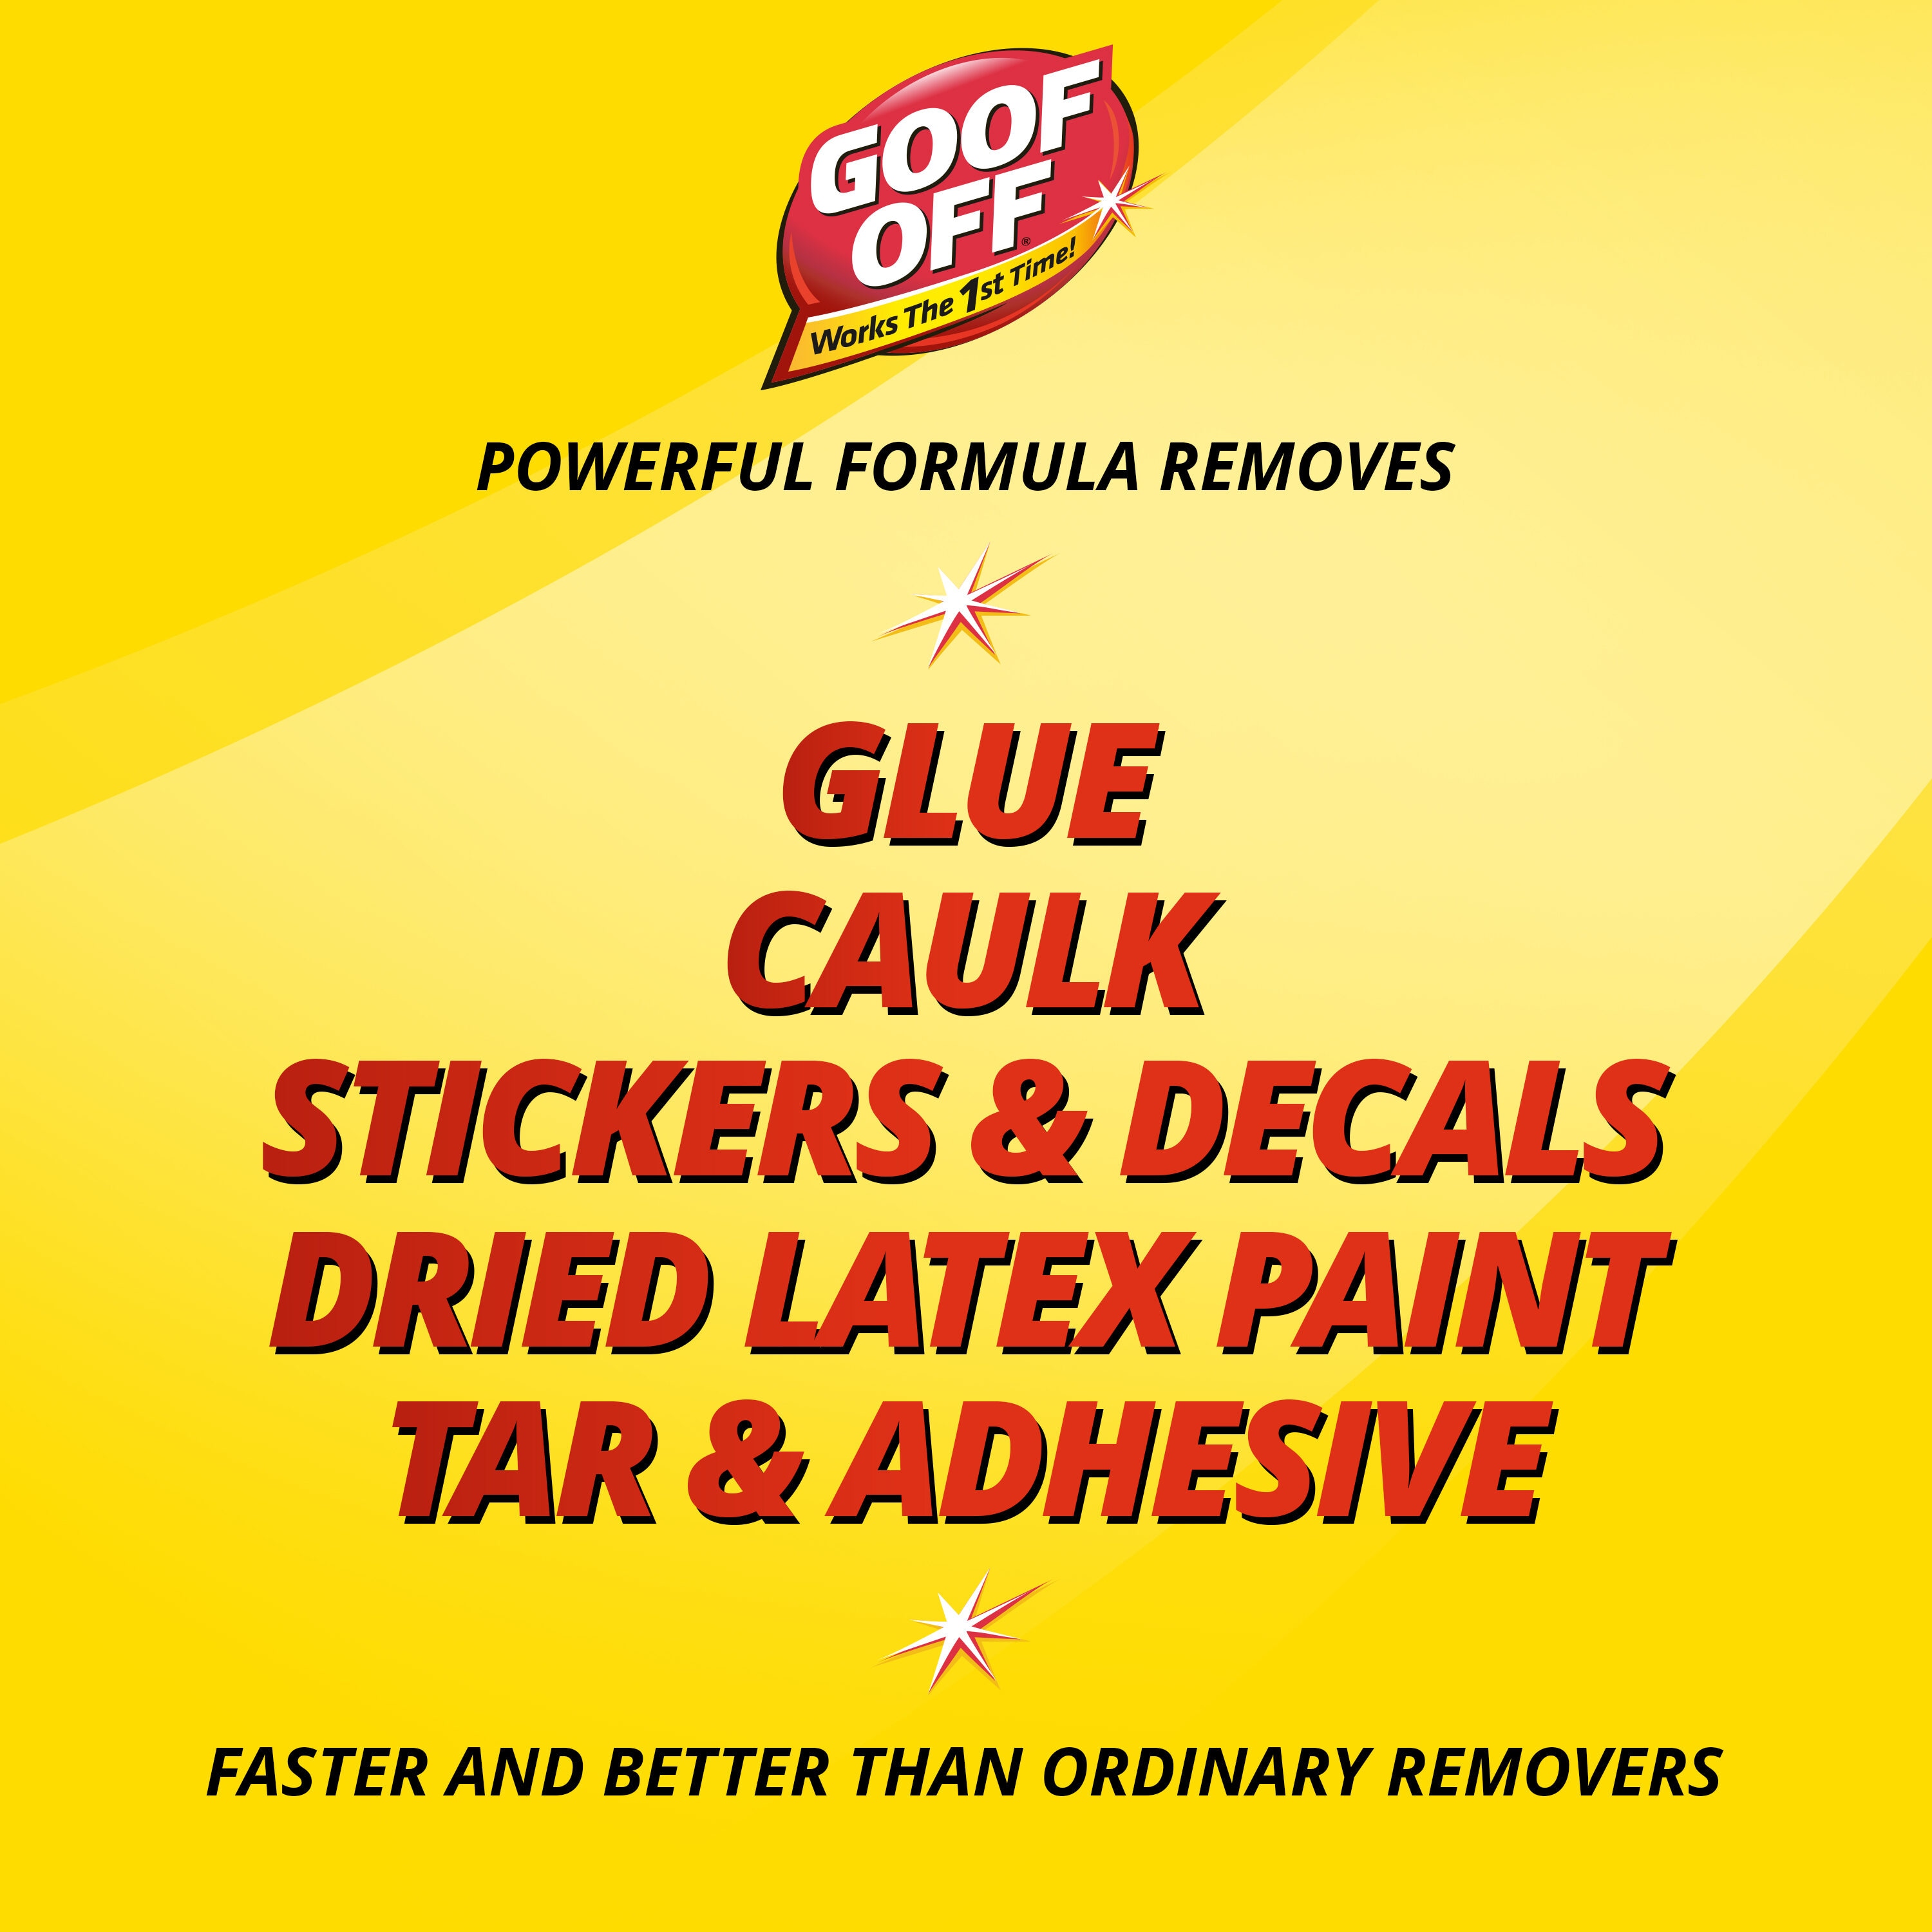 GOOF OFF, Drum, 55 gal Container Size, Adhesive Remover - 6XFF7